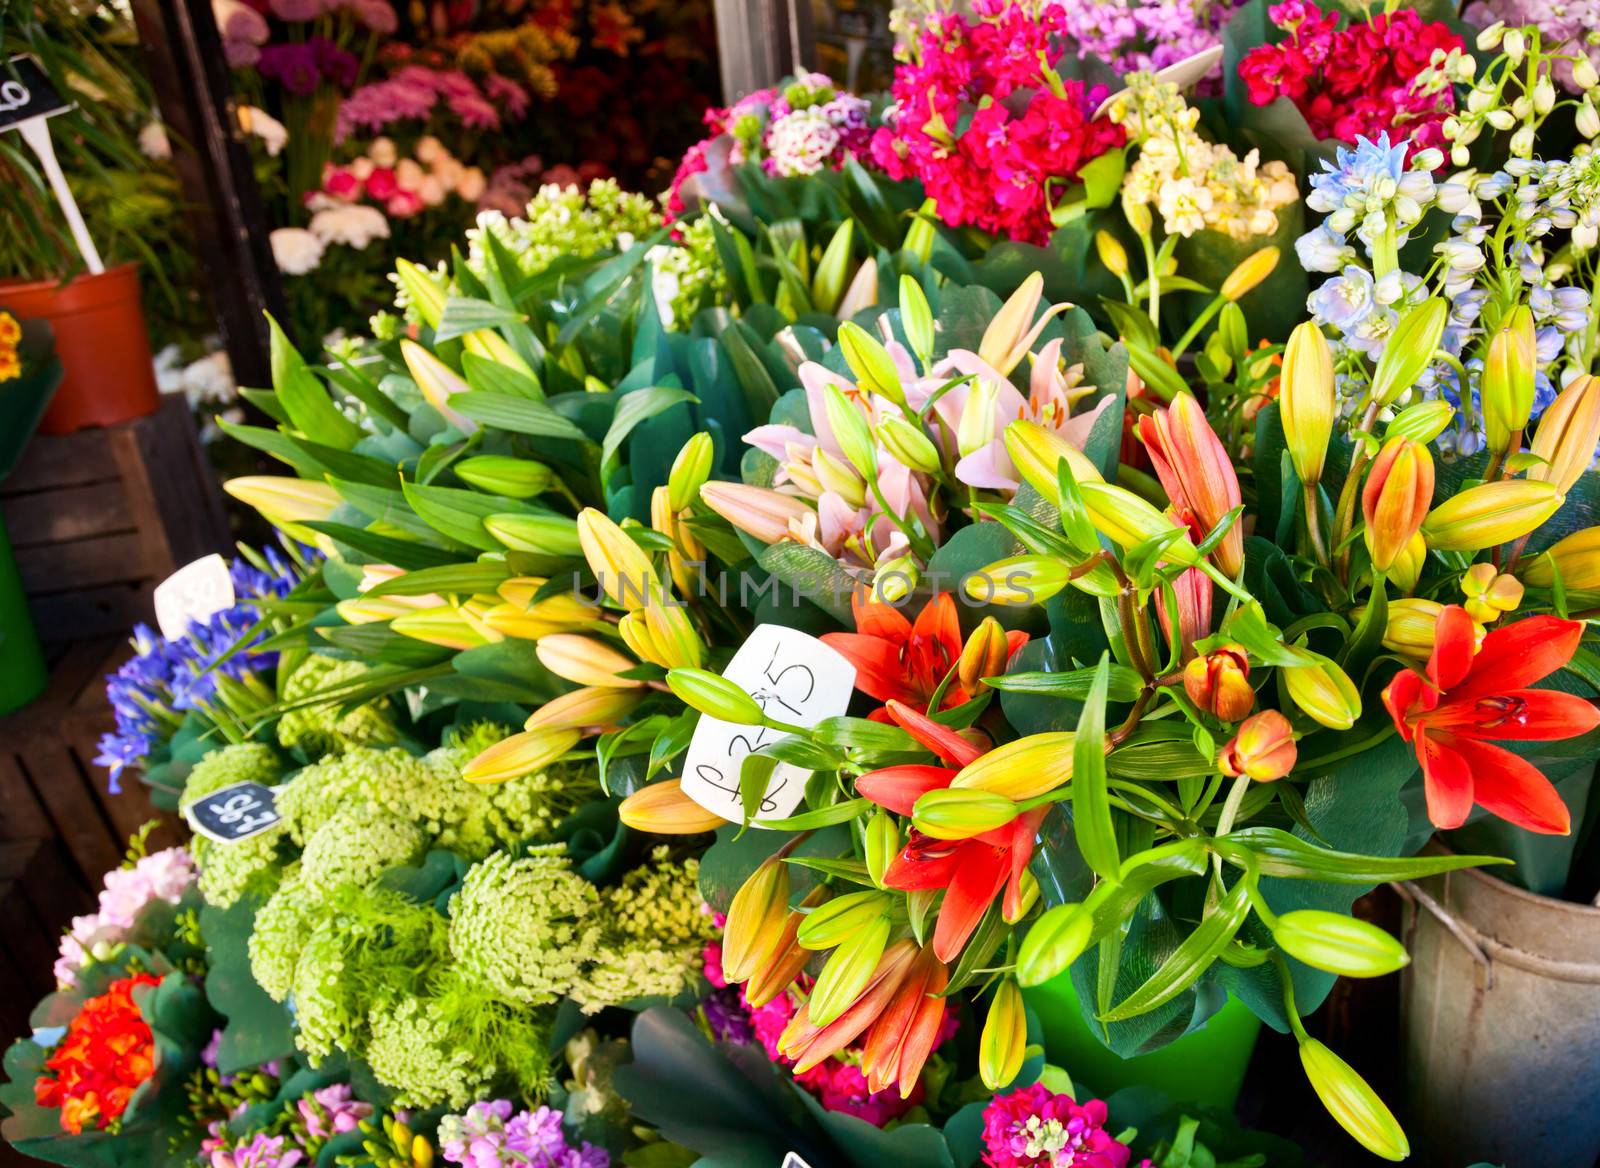 Flowers at street market in England